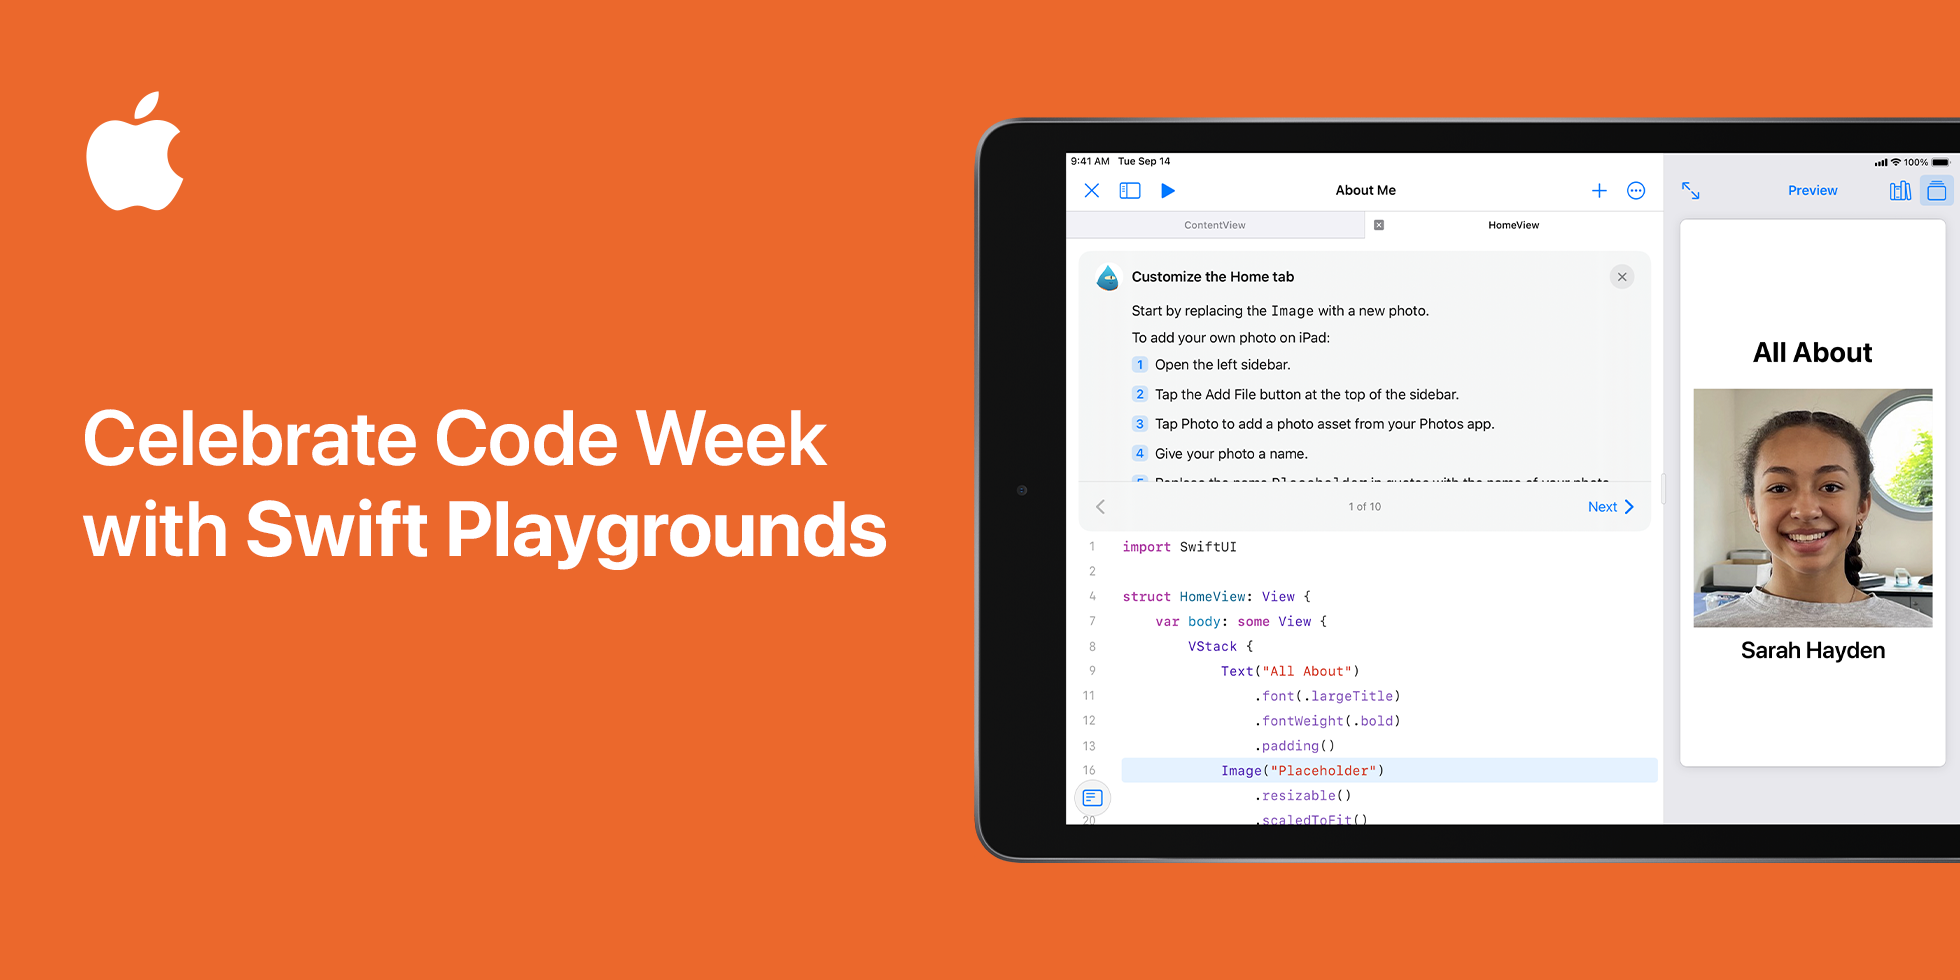 Image of a Swift Playground. Accompanying text - Celebrate Code Week with Swift Playgrounds.